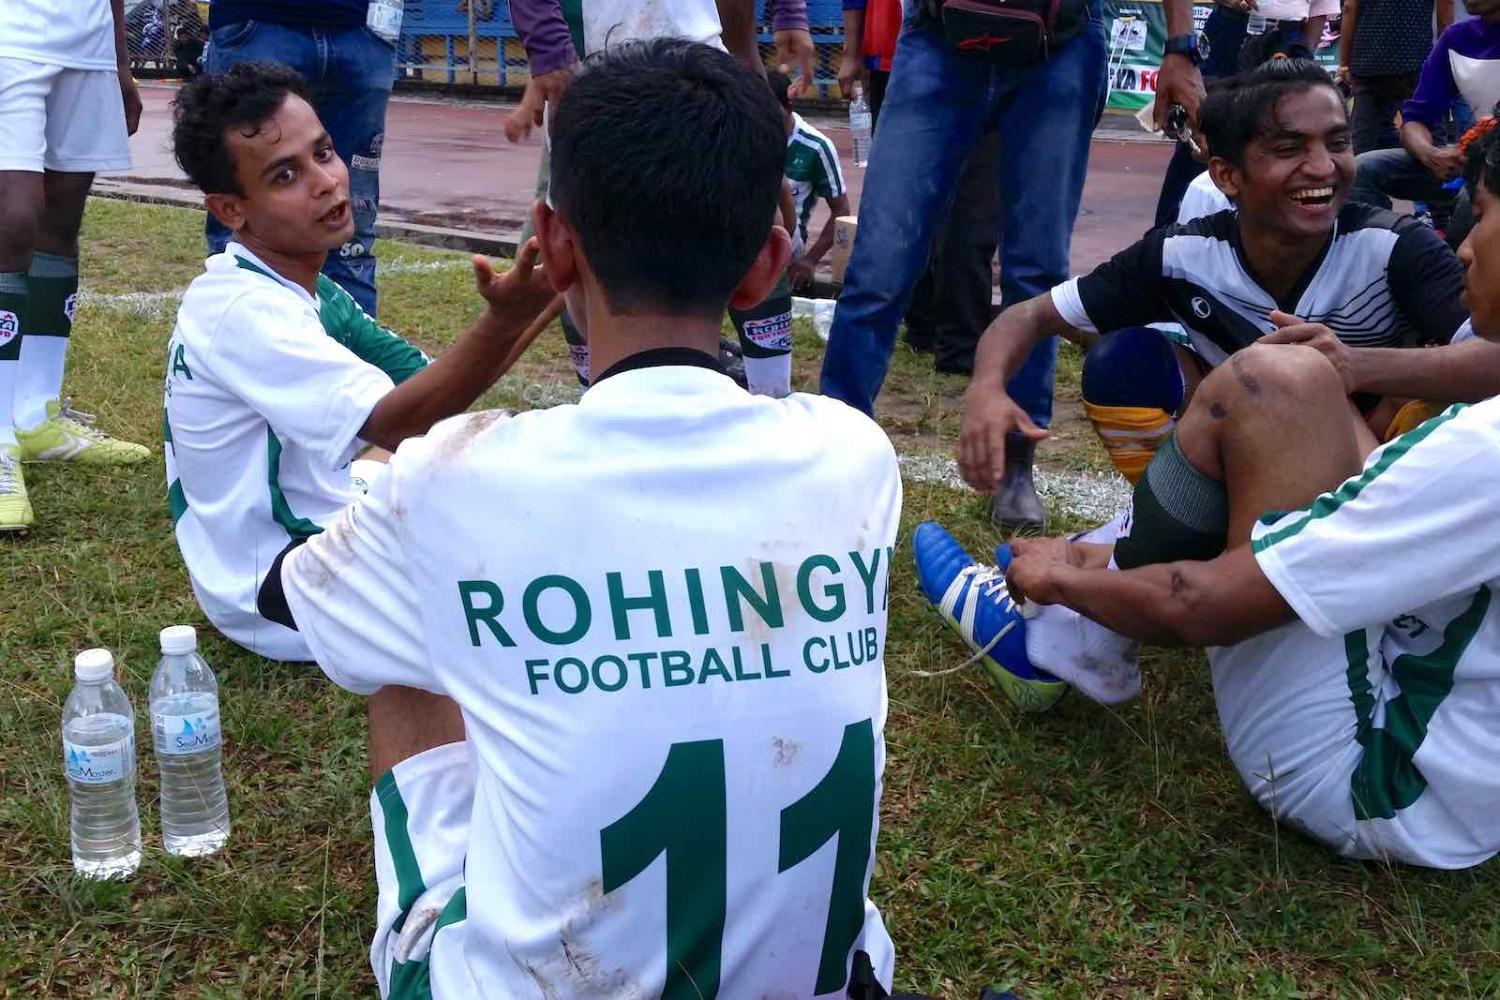 The Kuala Lumpur–based Rohingya Football Club, made up of refugees and migrants fleeing persecution in Myanmar, is recognised as the “Rohingya National Football Team” (Photos by James Rose)